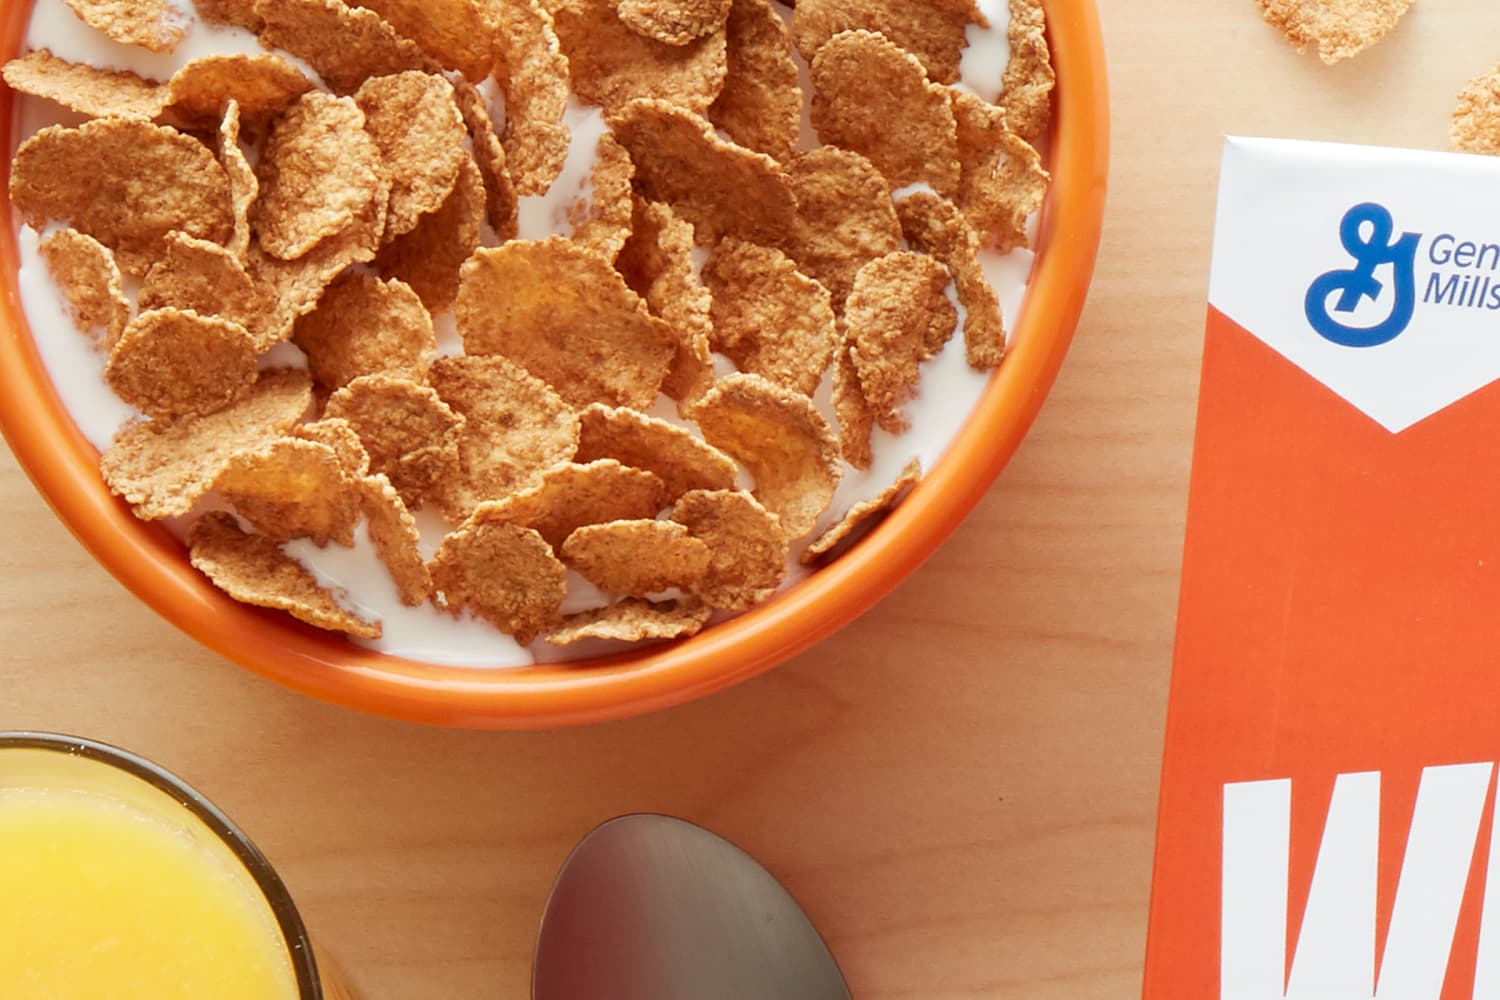 Bowl of Wheaties cereal